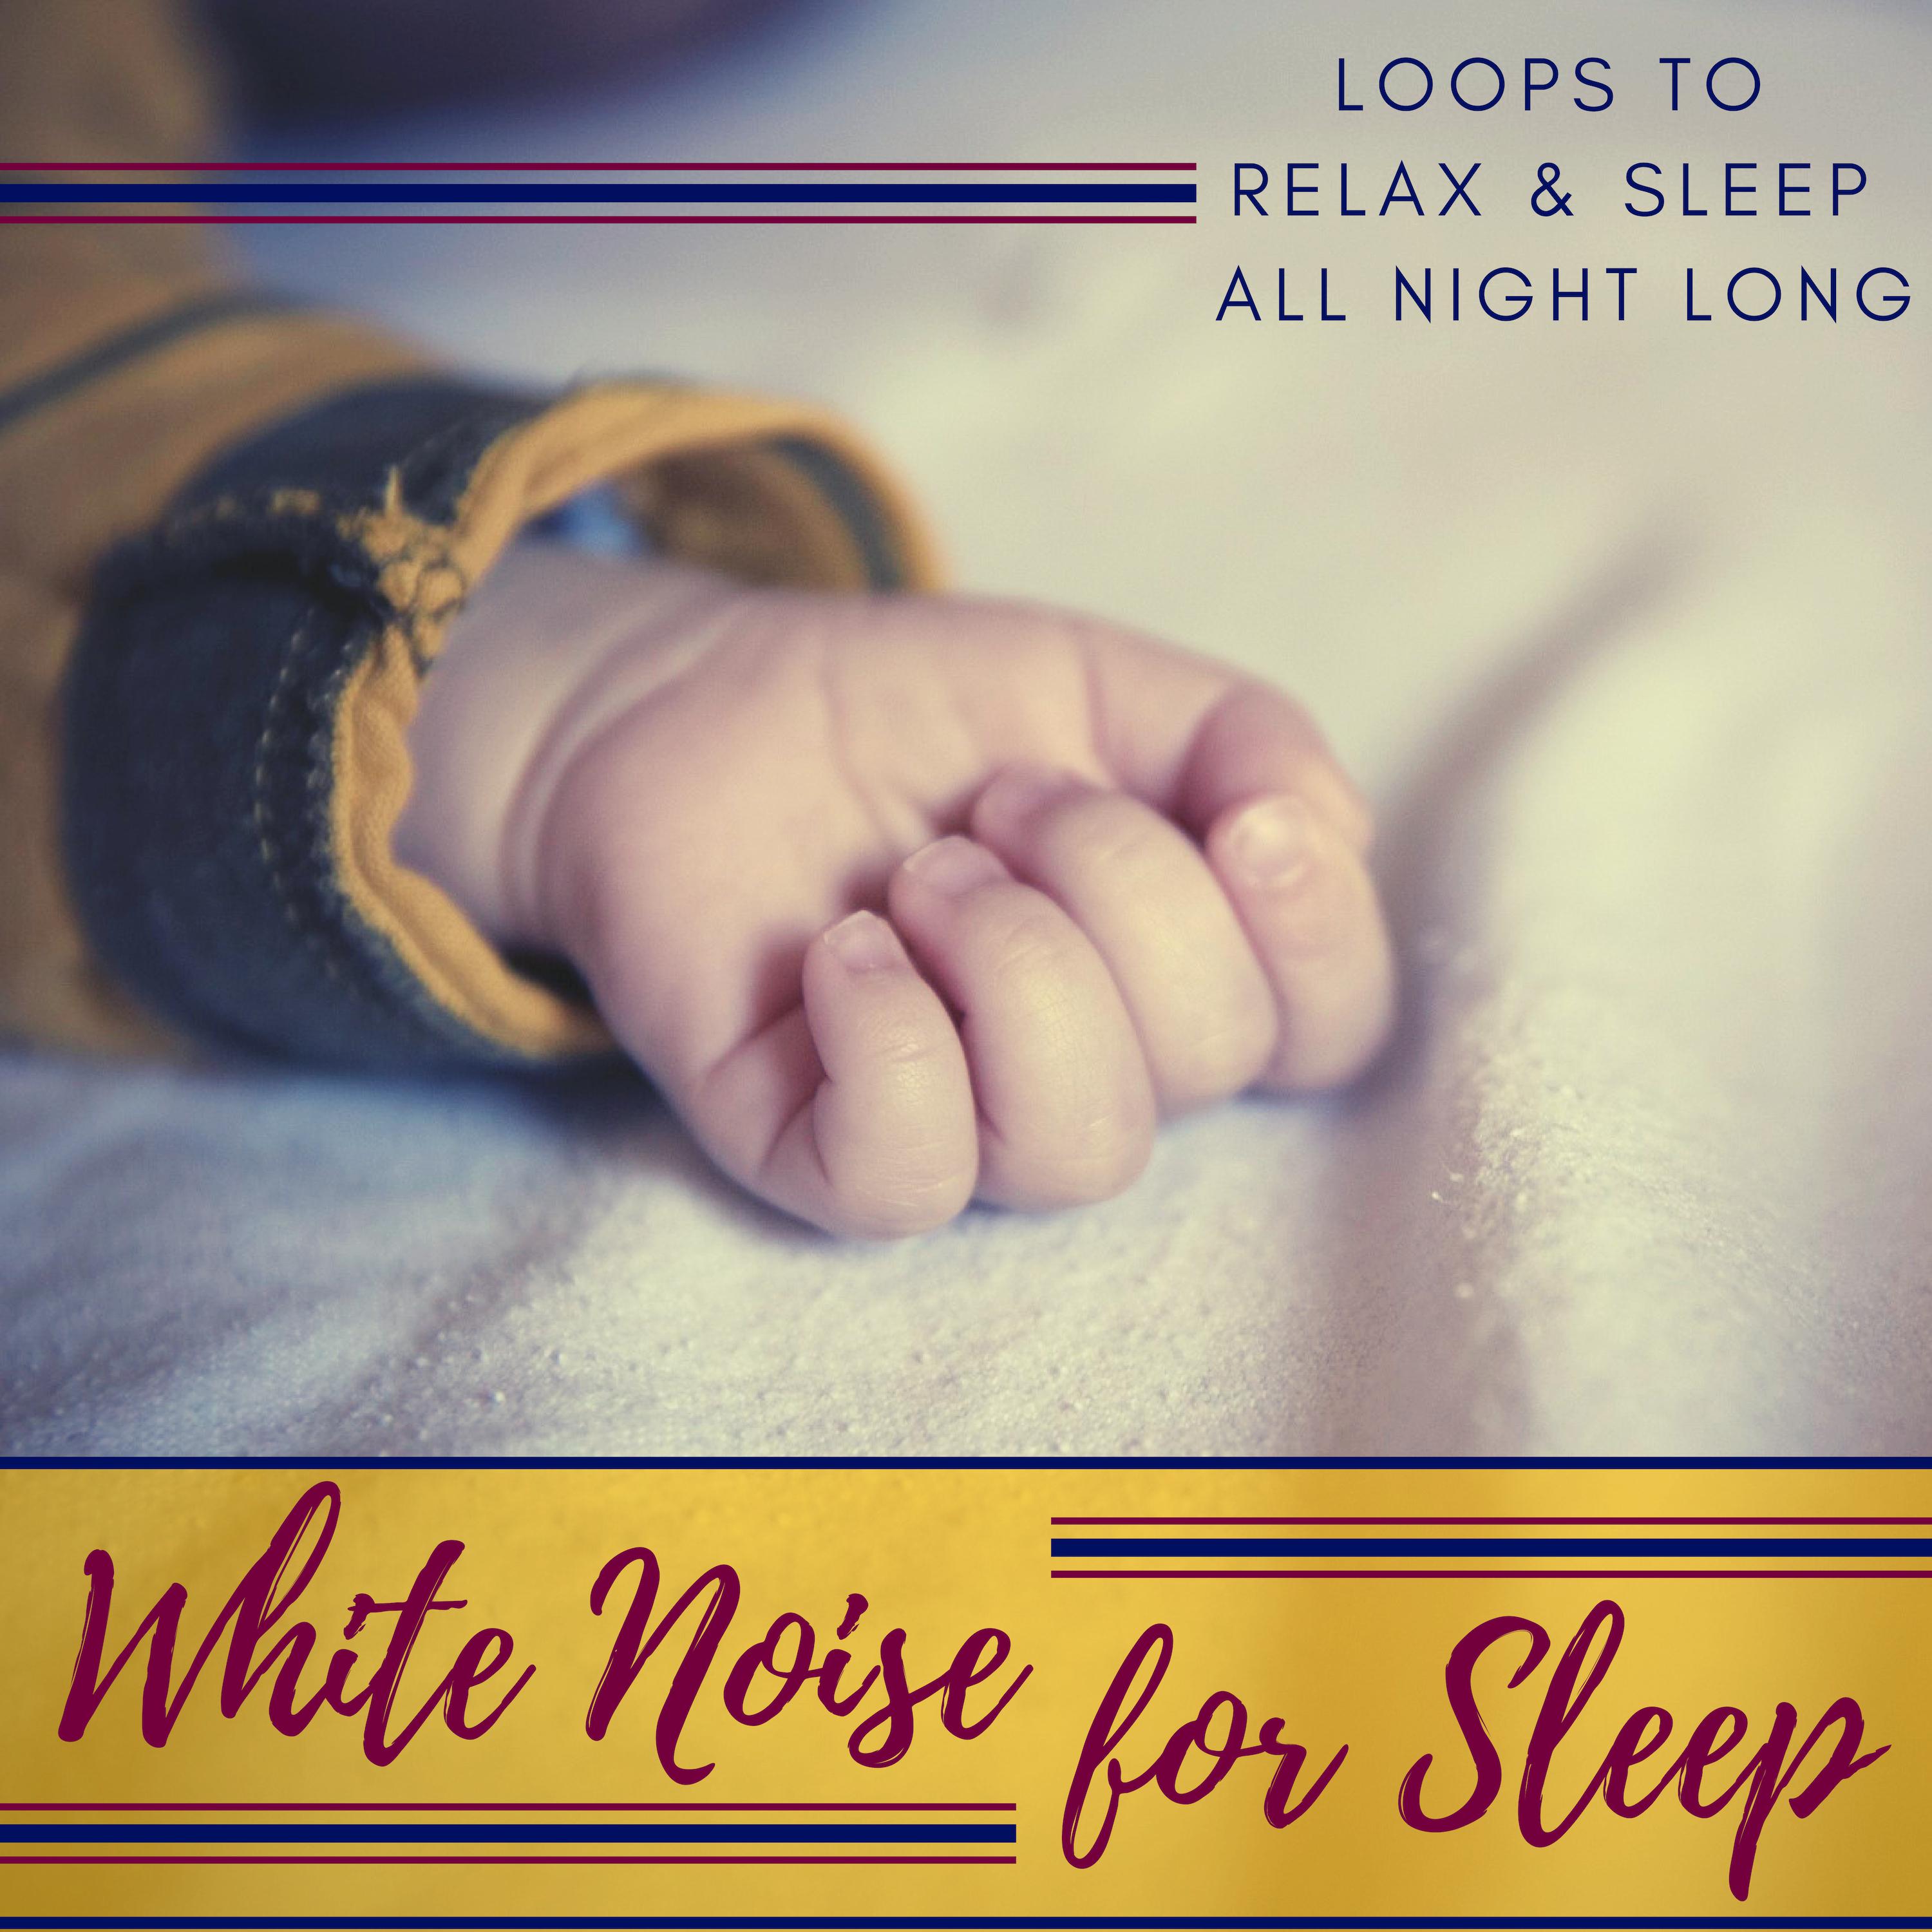 White Noise for Sleep - Loops to Relax & Sleep All Night Long